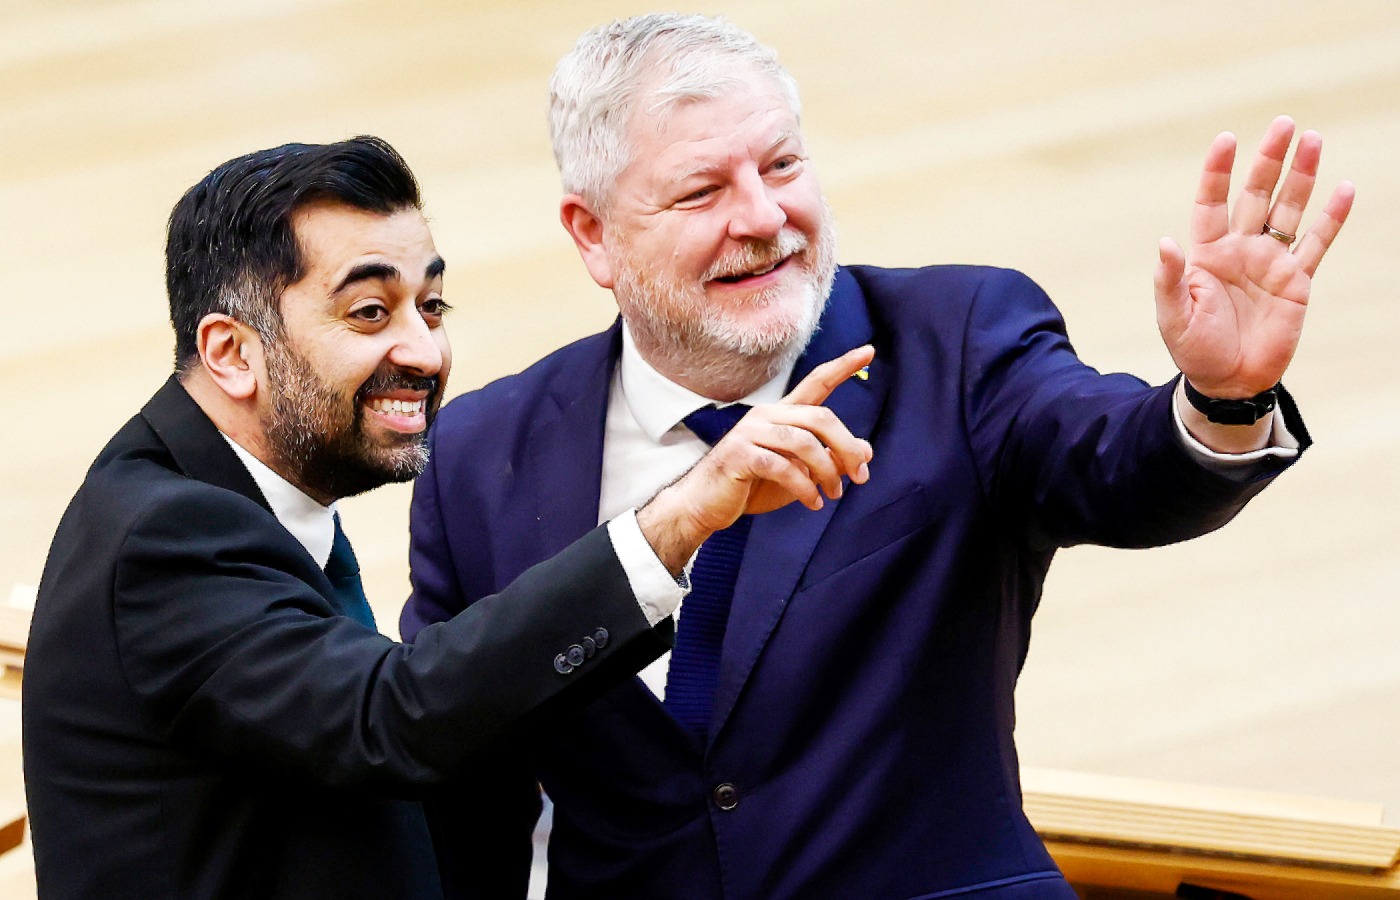 Angus Robertson was SNP Westminster leader until 2017 before losing his seat and later being elected to the Scottish Parliament, where he now serves as Humza Yousaf's constitution secretary.